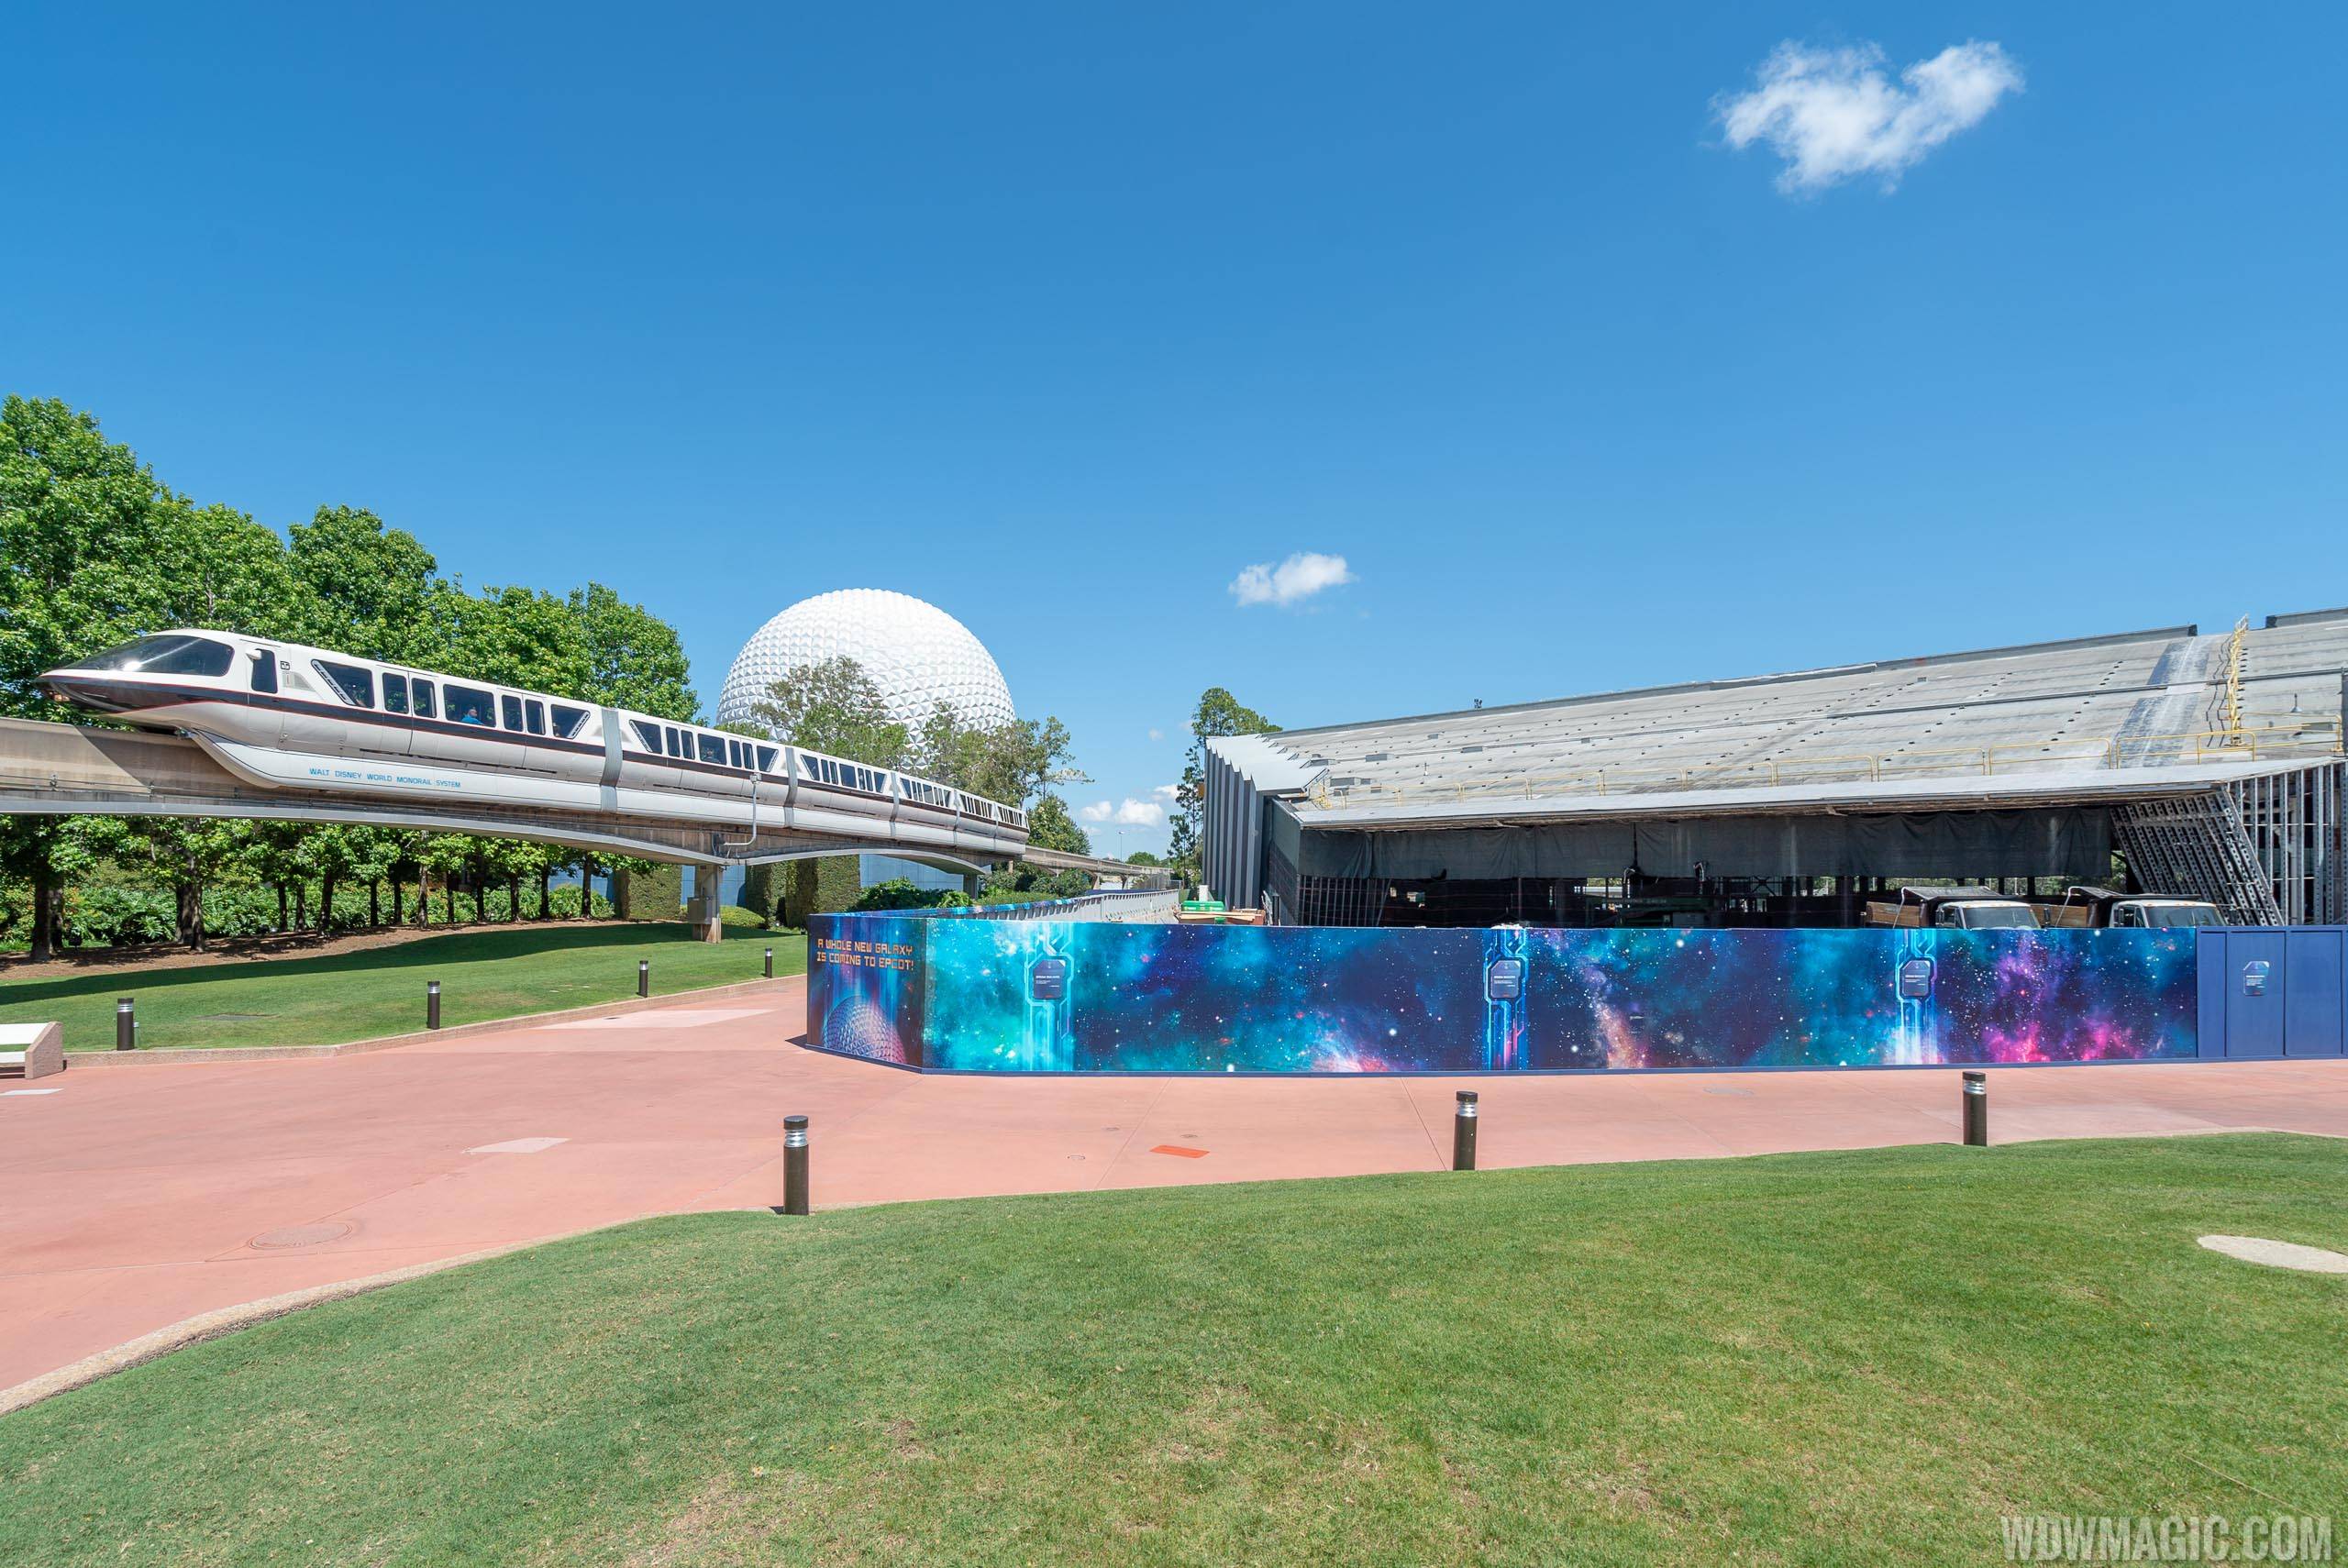 PHOTOS - Guardians of the Galaxy construction at Epcot from inside the park